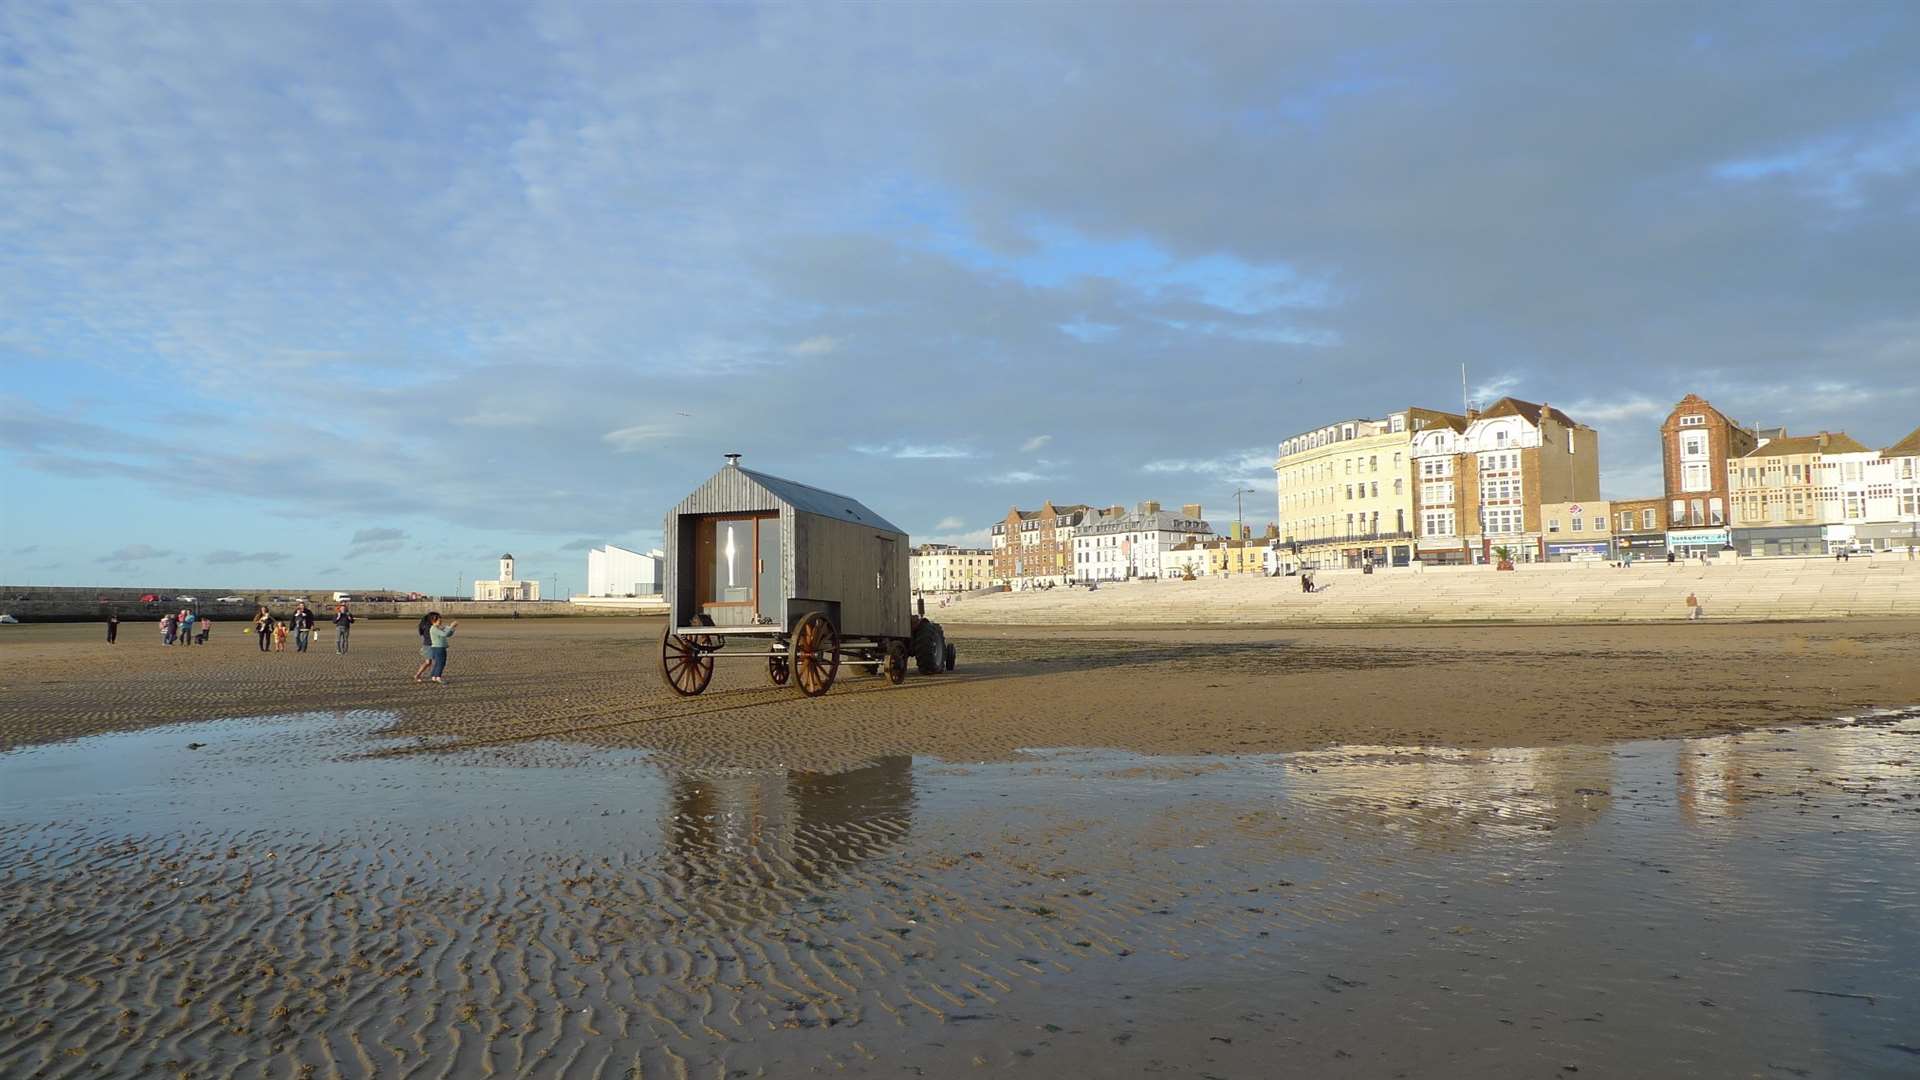 Once finished, the machine will feature on Margate beach. Picture: Re-Works Studio Ltd